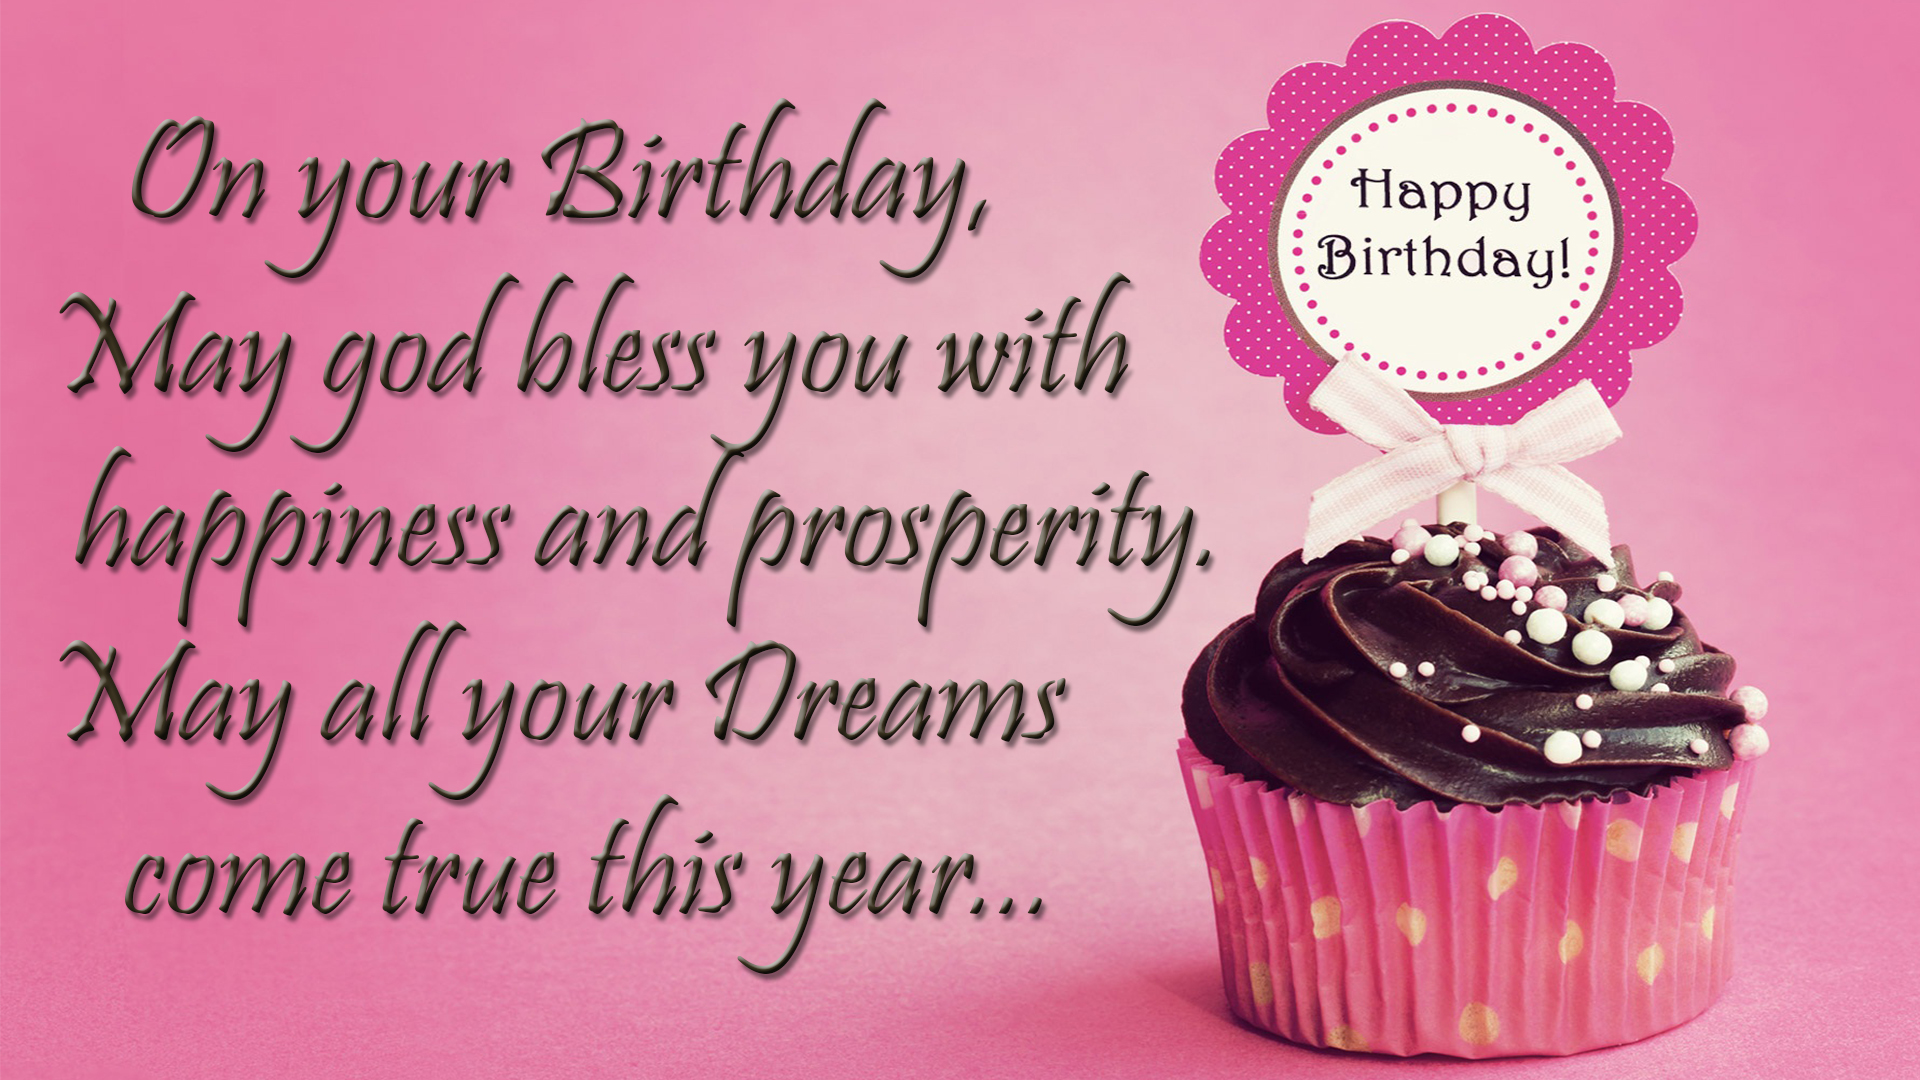 Happy Birthday Greeting Cards Images | Birthday Wishes